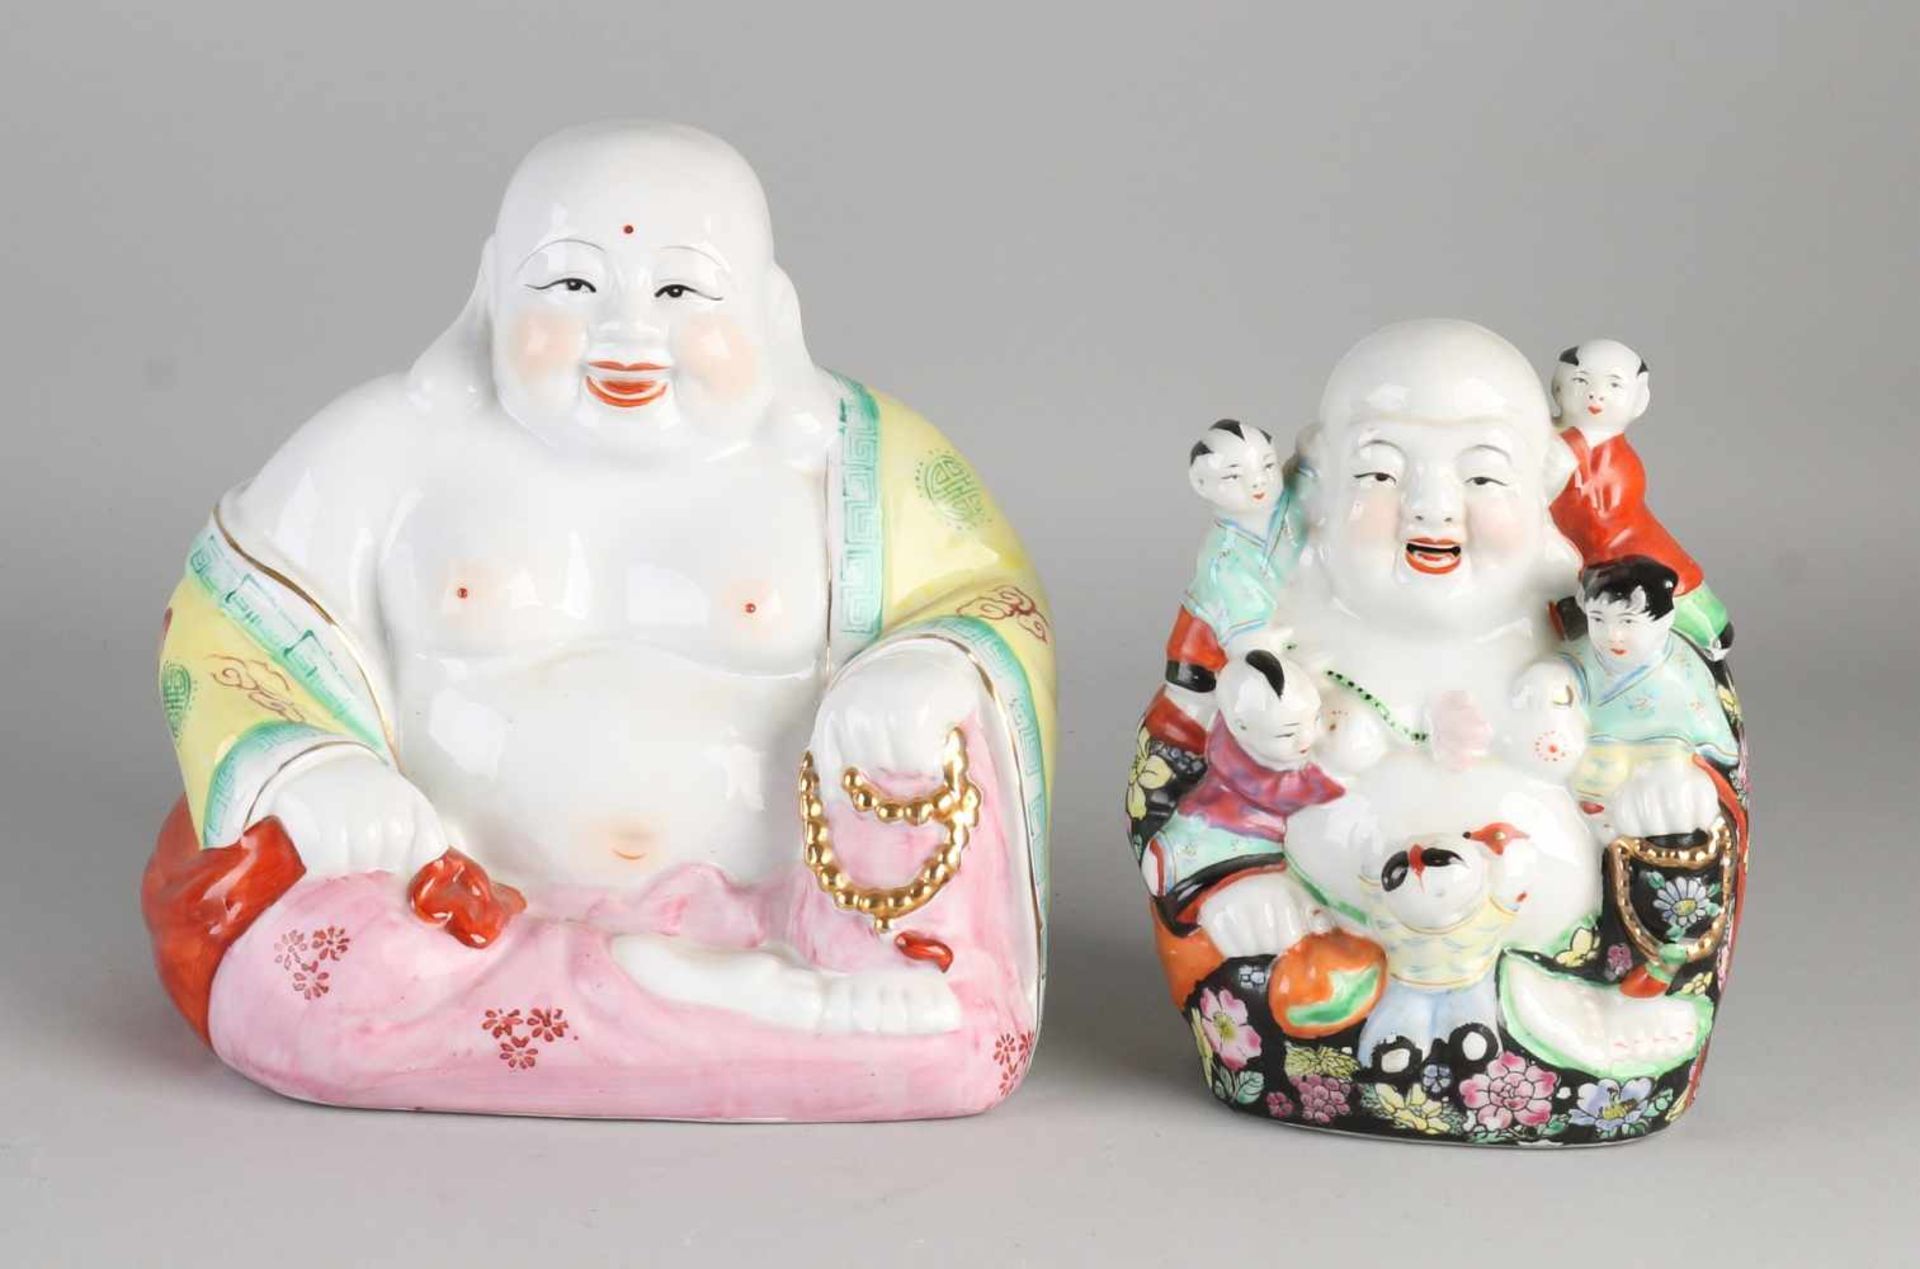 Two Chinese porcelain smiling Buddhas. 20th century. Size: H 17-20 cm. In good condition.